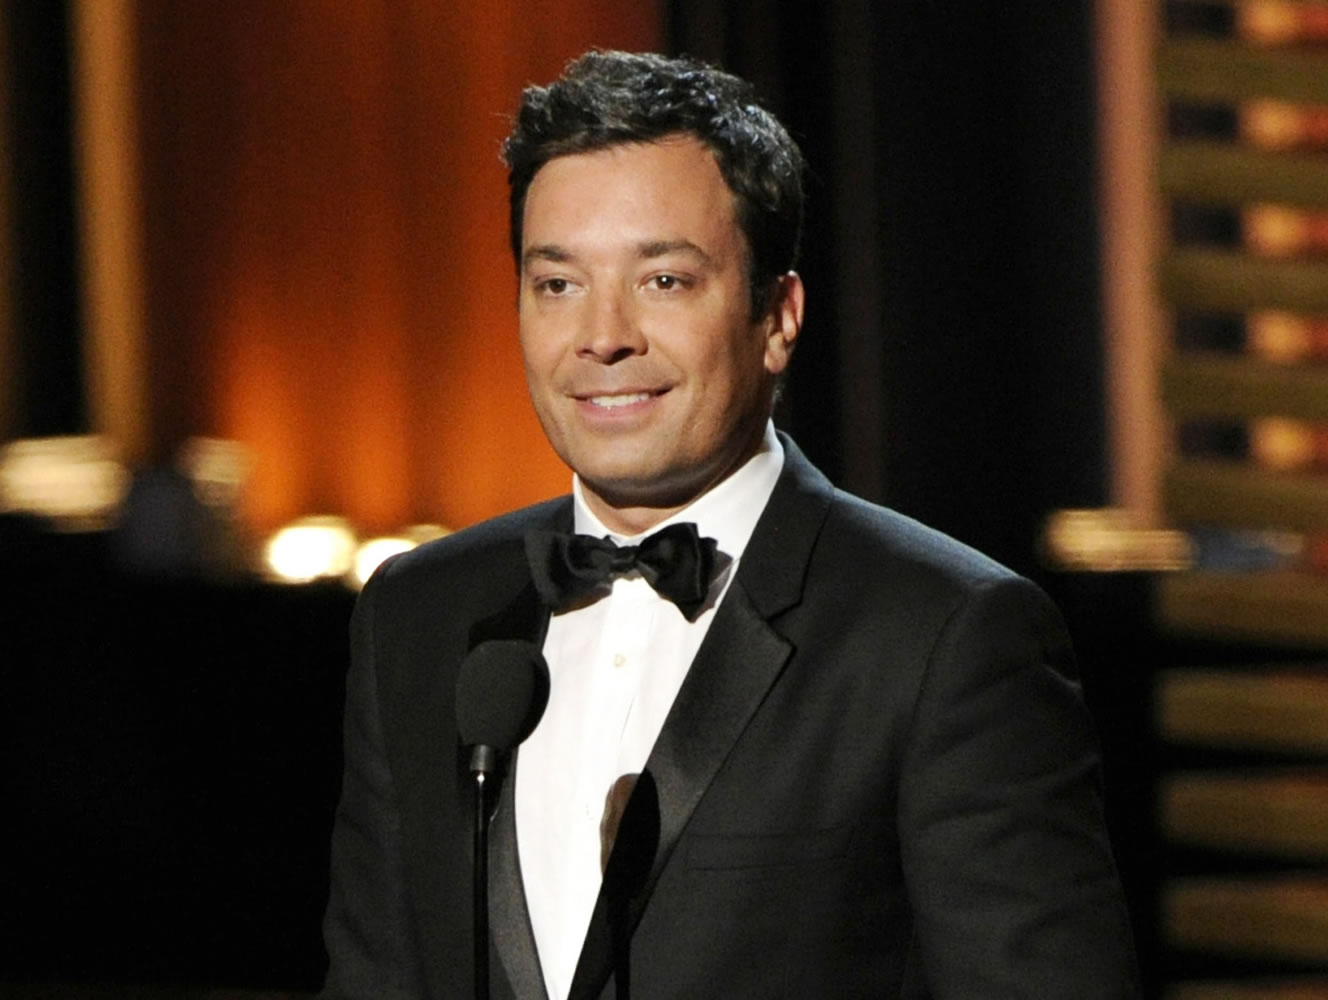 &quot;The Tonight Show Starring Jimmy Fallon&quot; ranked highest in a poll of the most popular late night talk show hosts.